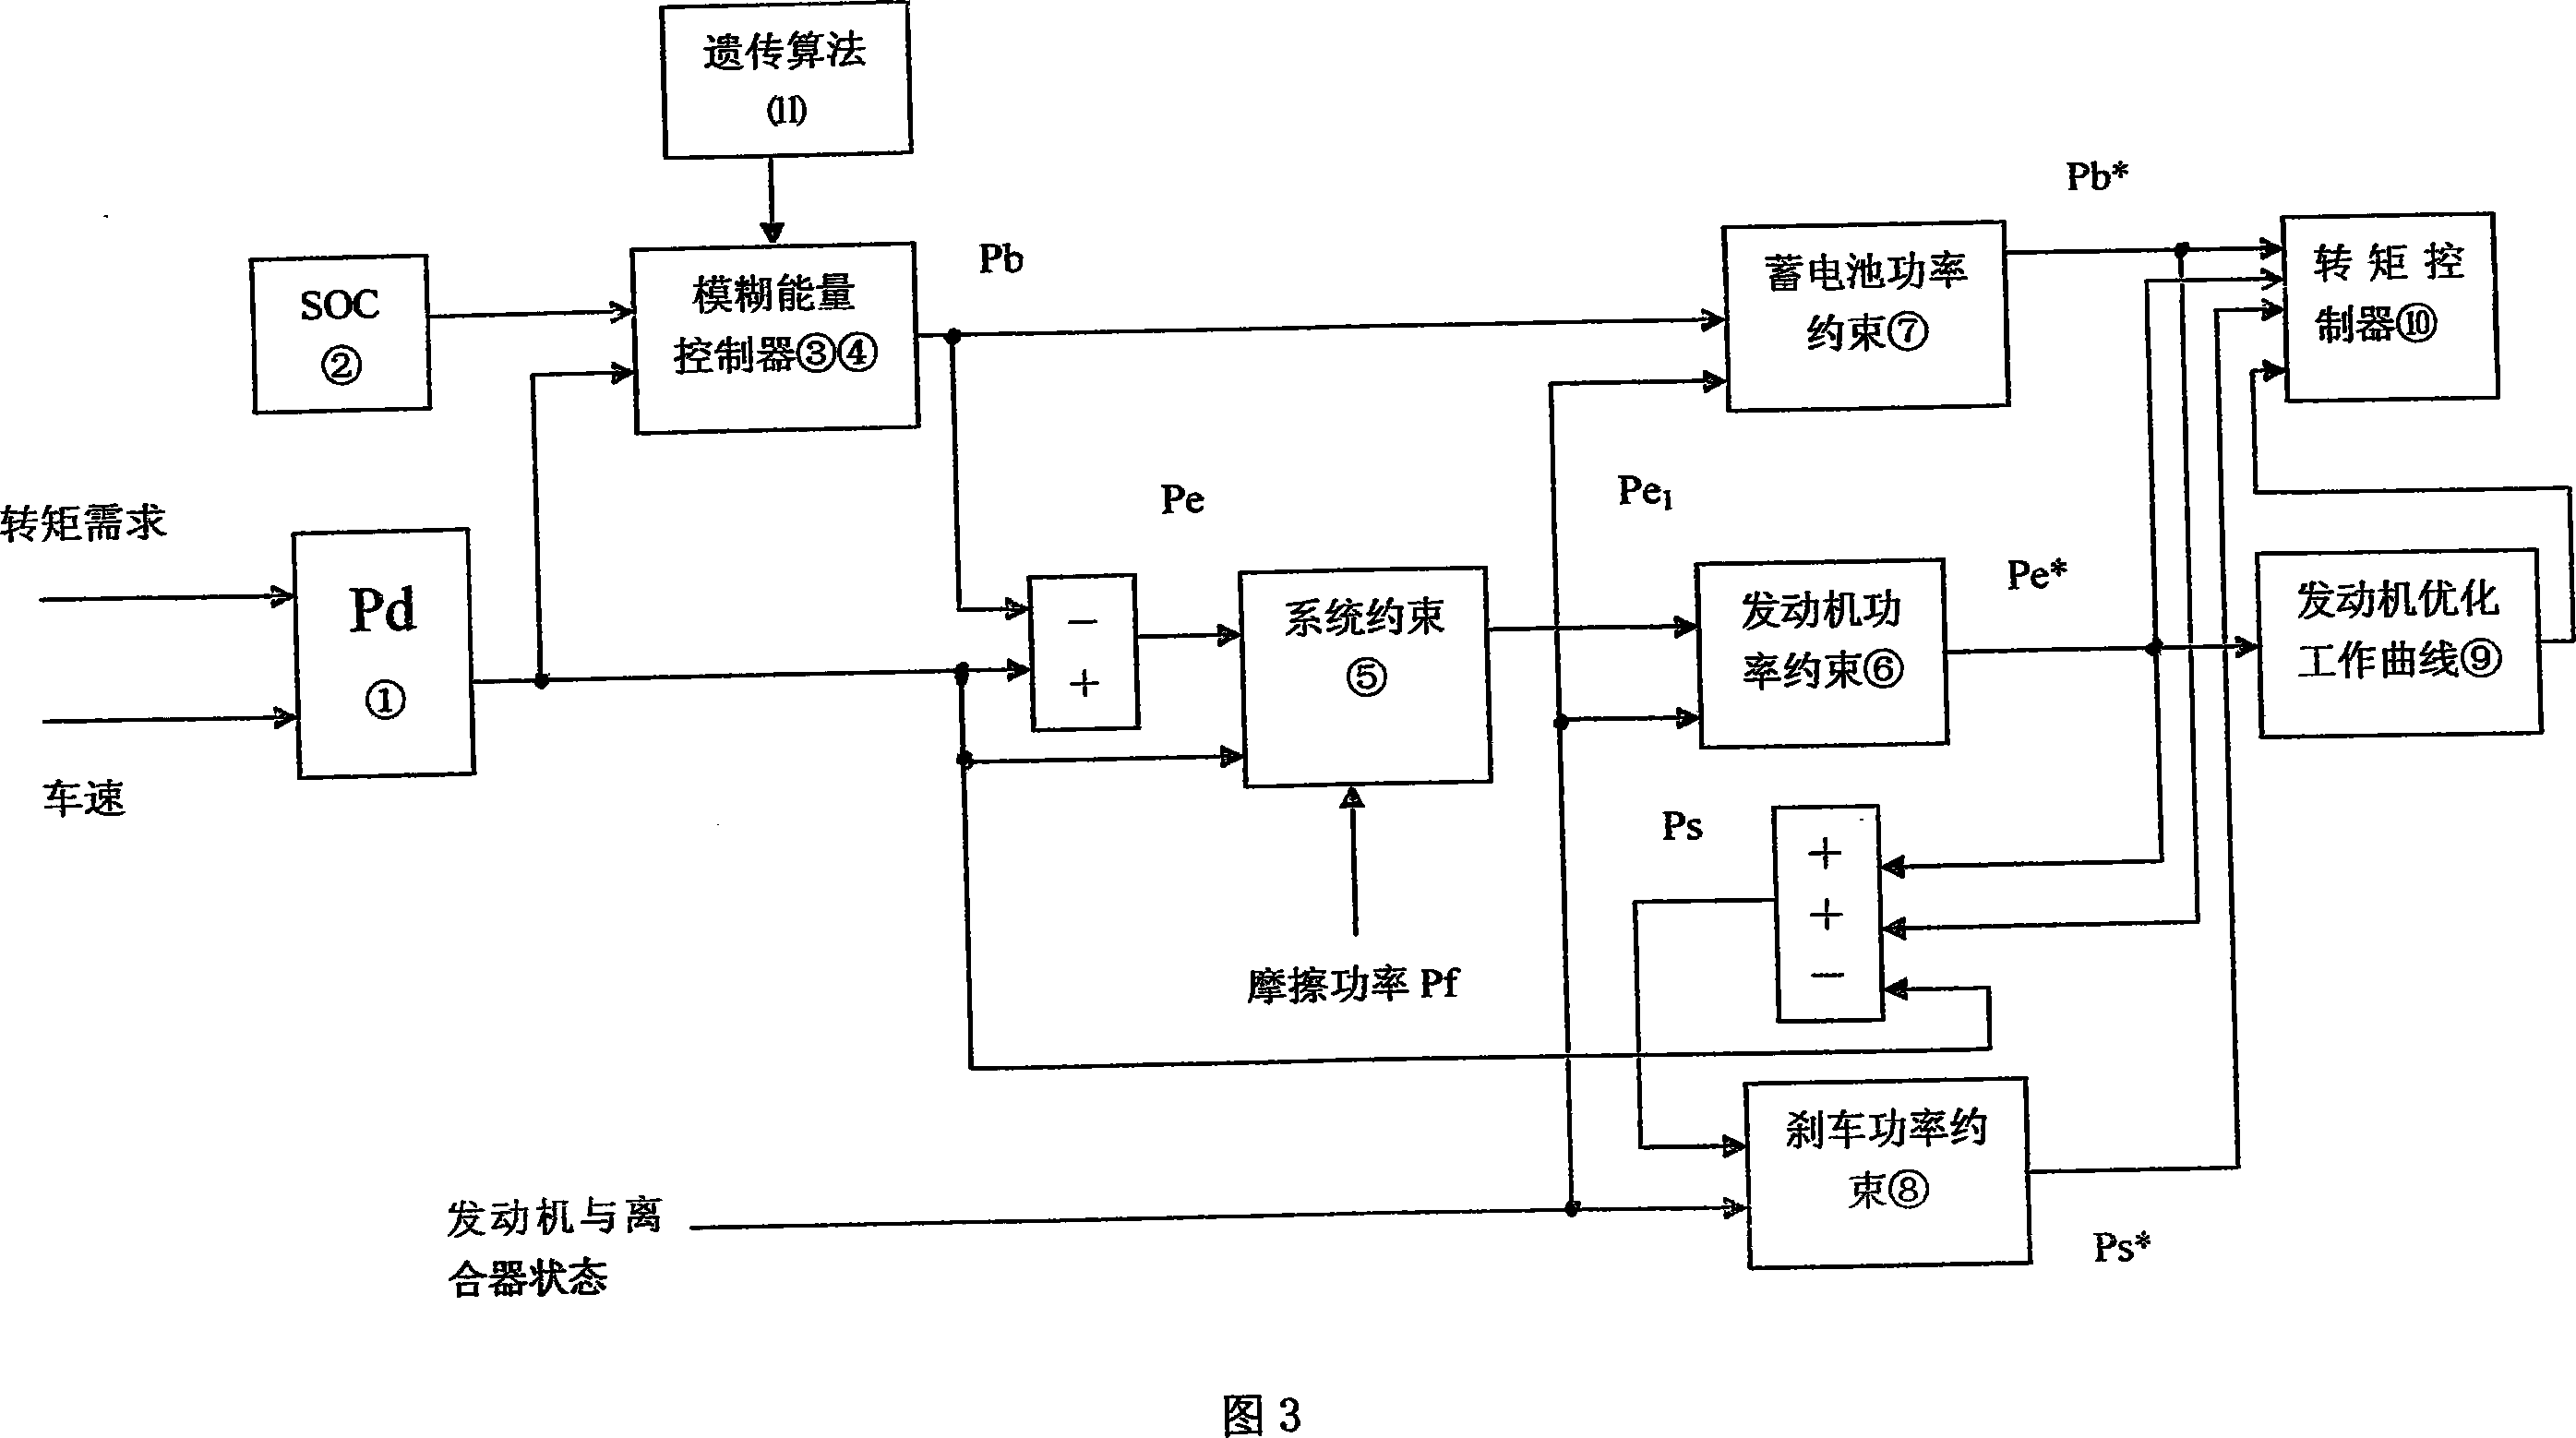 Energy flow controlling method for parallel type mixed power system